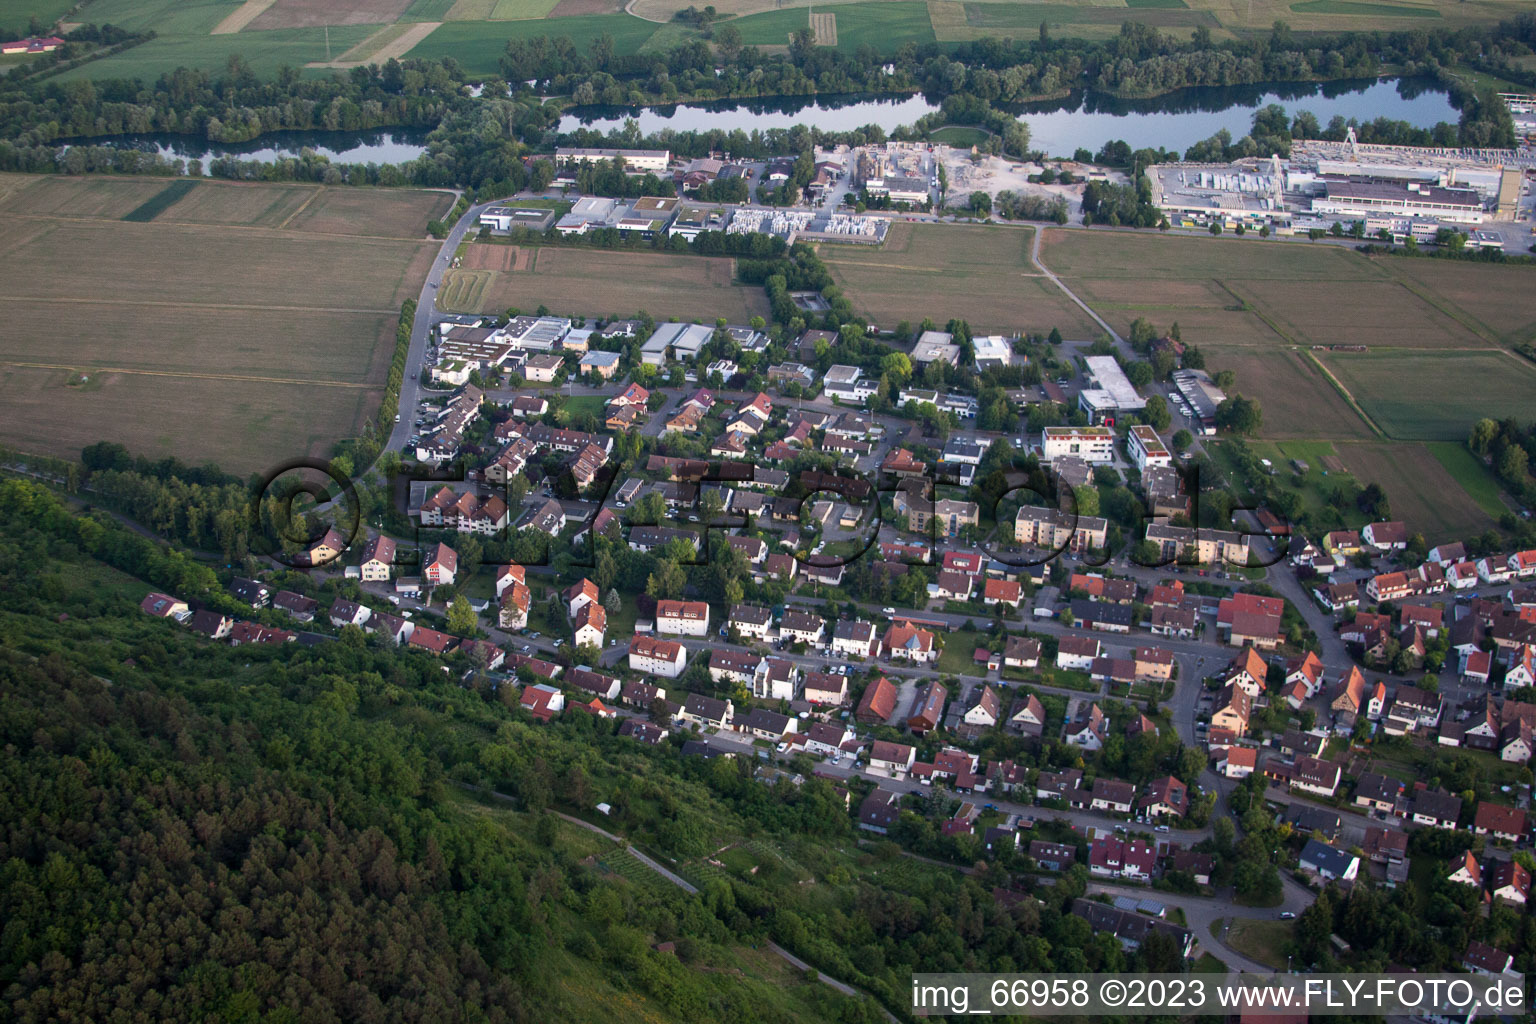 Hirschau in the state Baden-Wuerttemberg, Germany seen from above